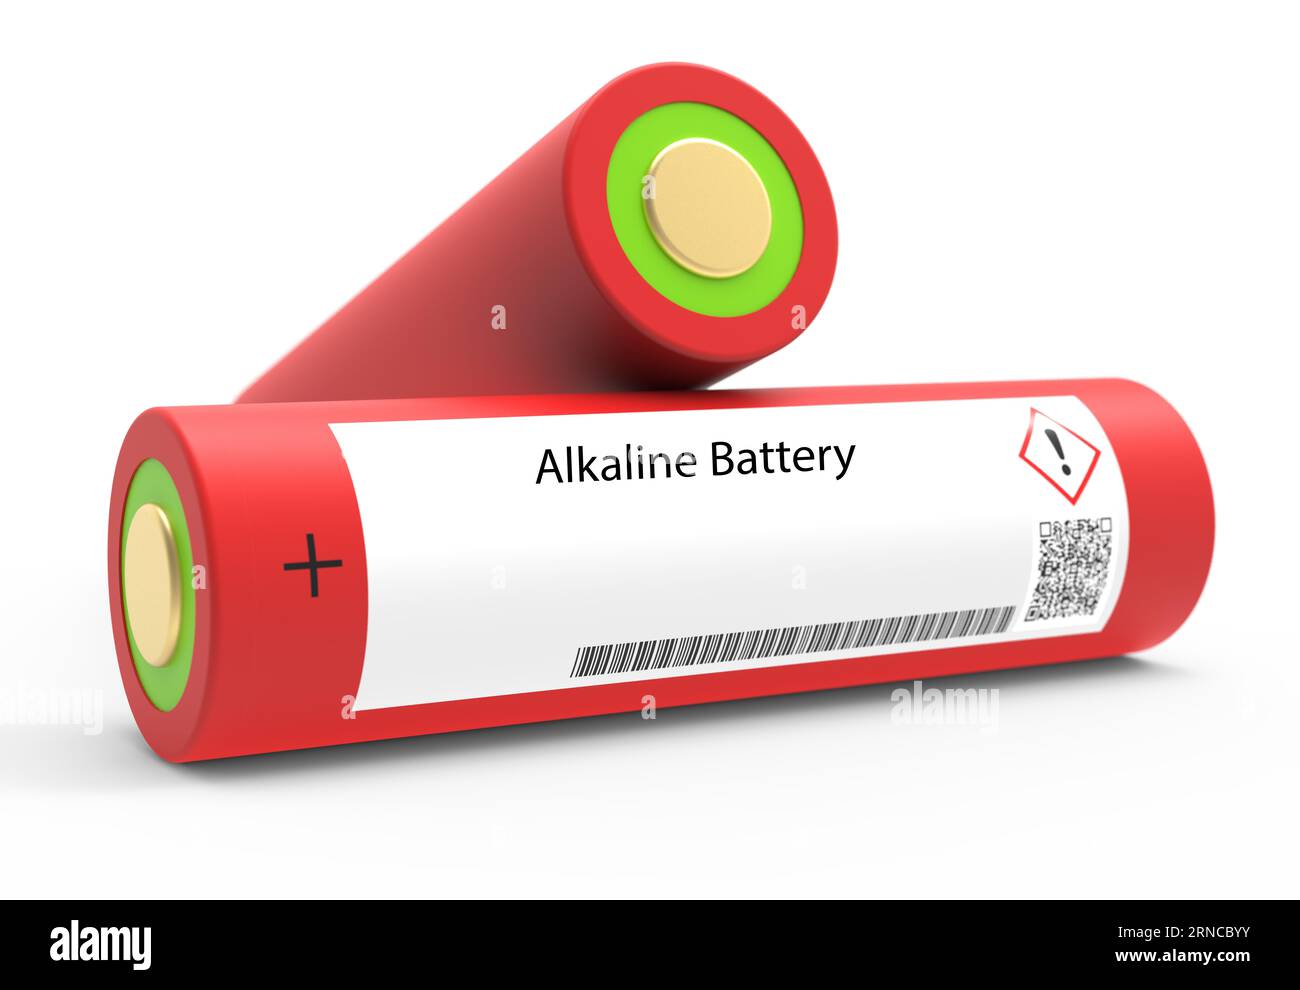 Alkaline Battery An alkaline battery is a primary battery that uses manganese dioxide and zinc to generate electricity. It is a common type of battery Stock Photo